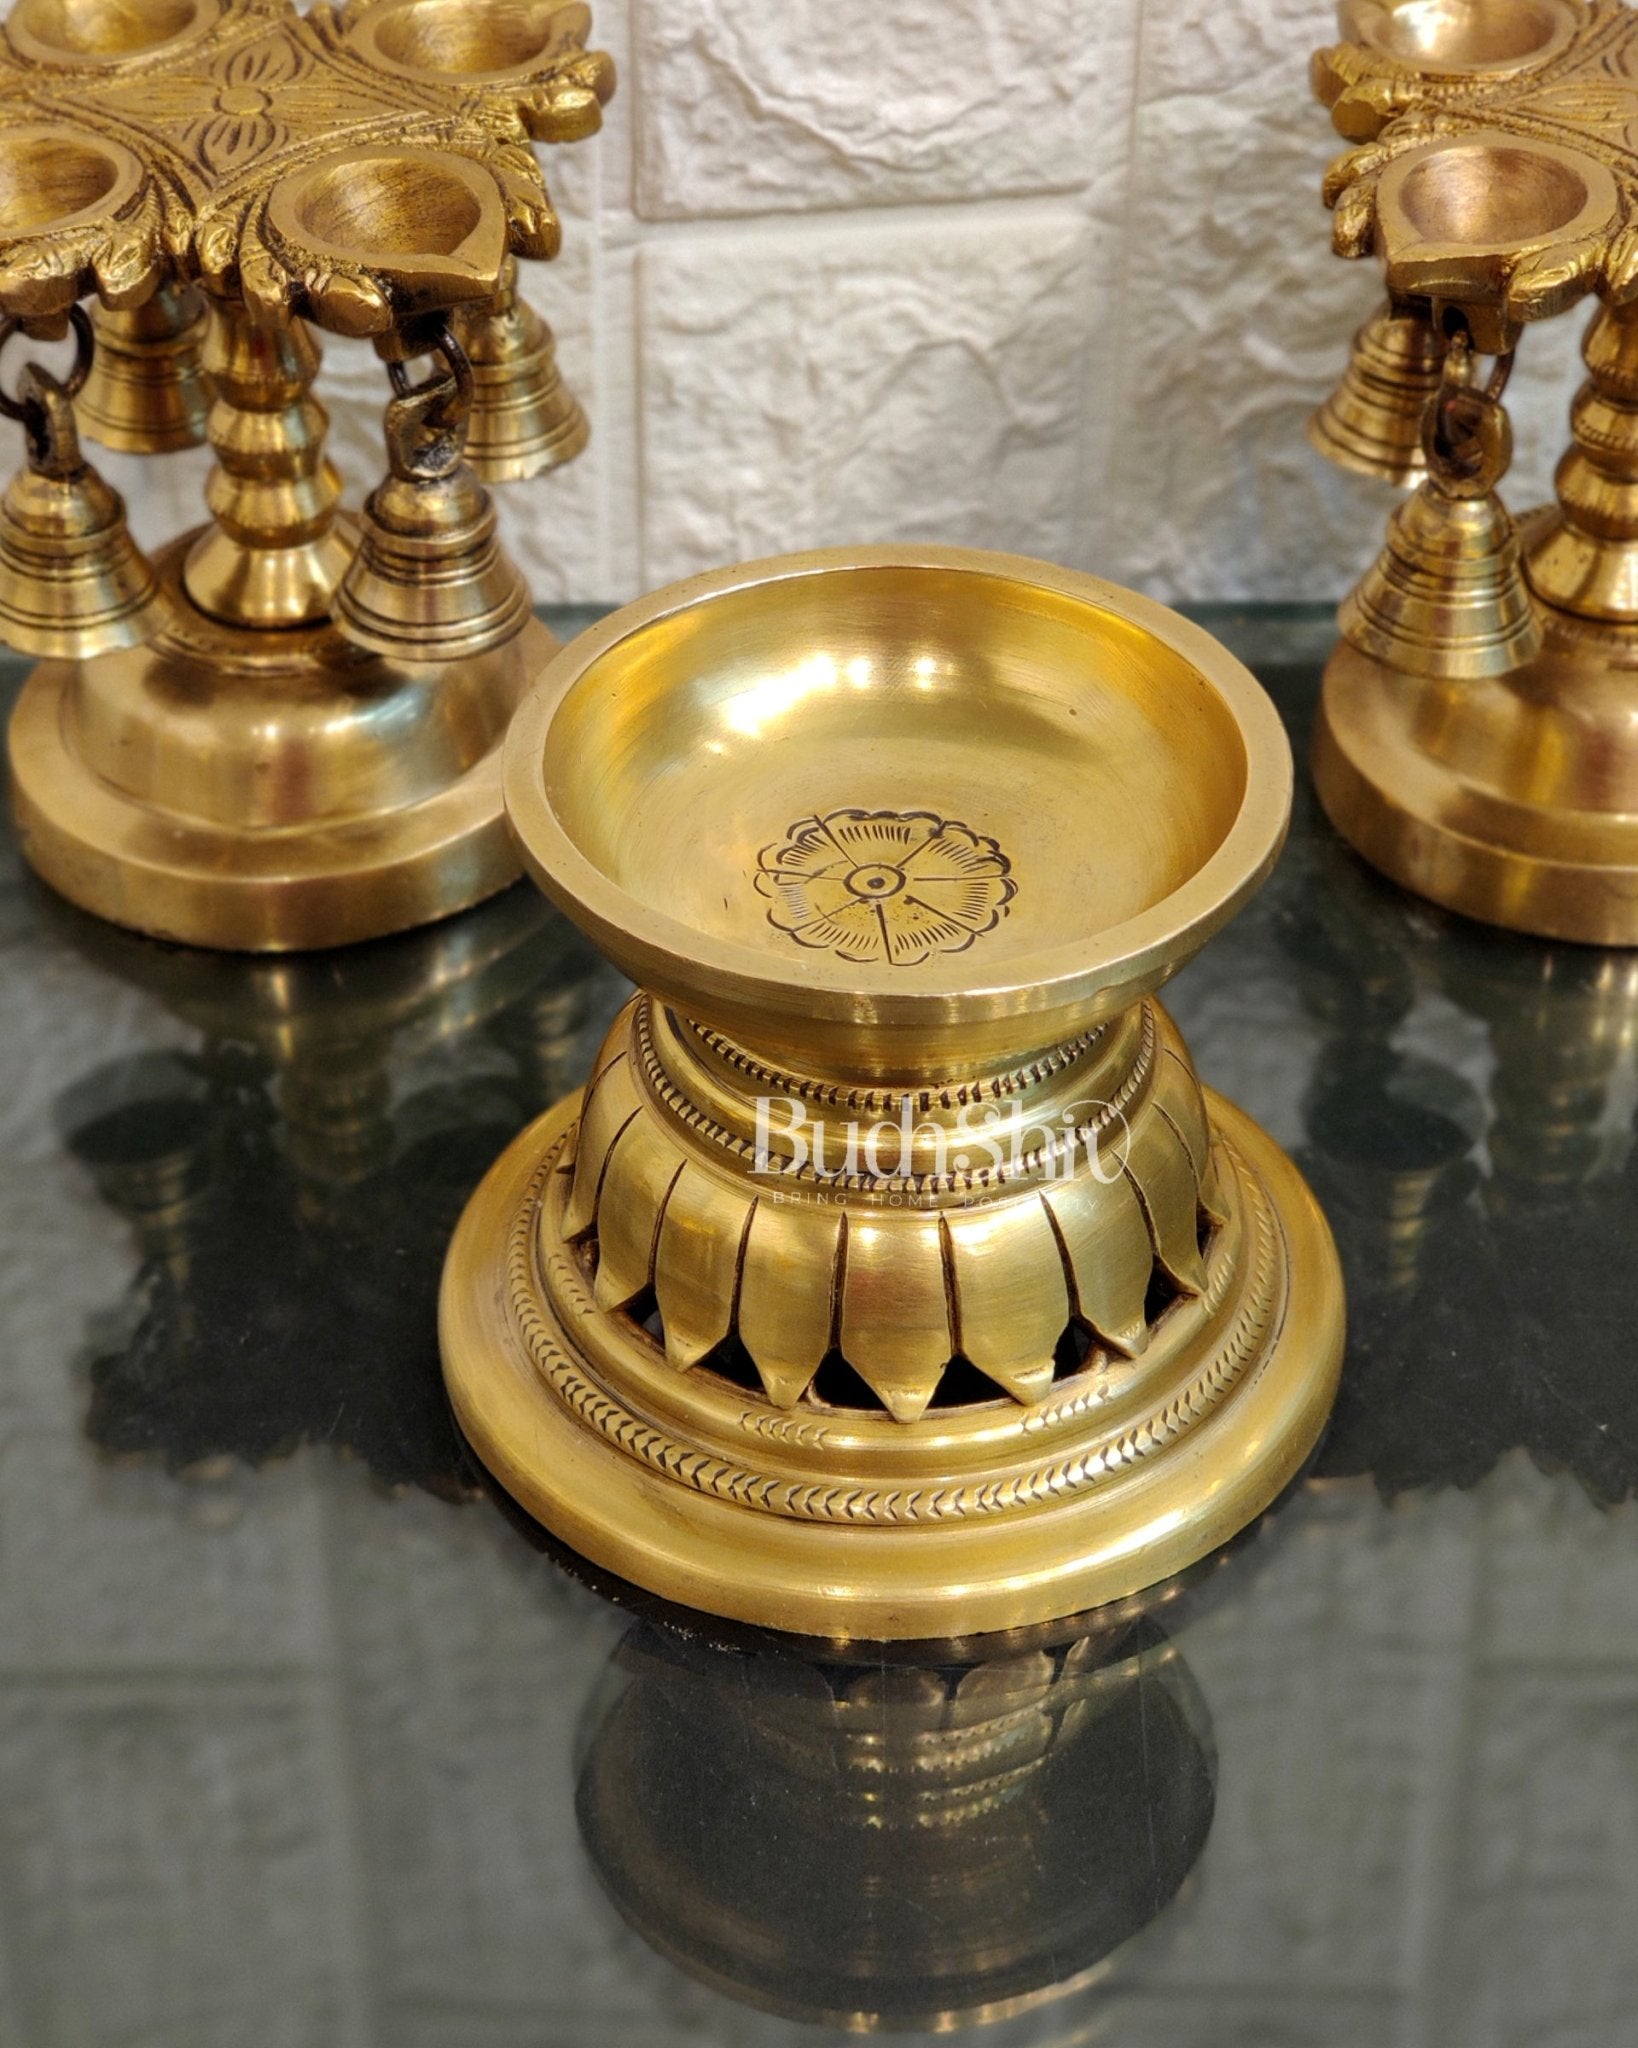 Handcrafted Brass Round Lotus Candle Holder | Exquisite and Elegant - Budhshiv.com